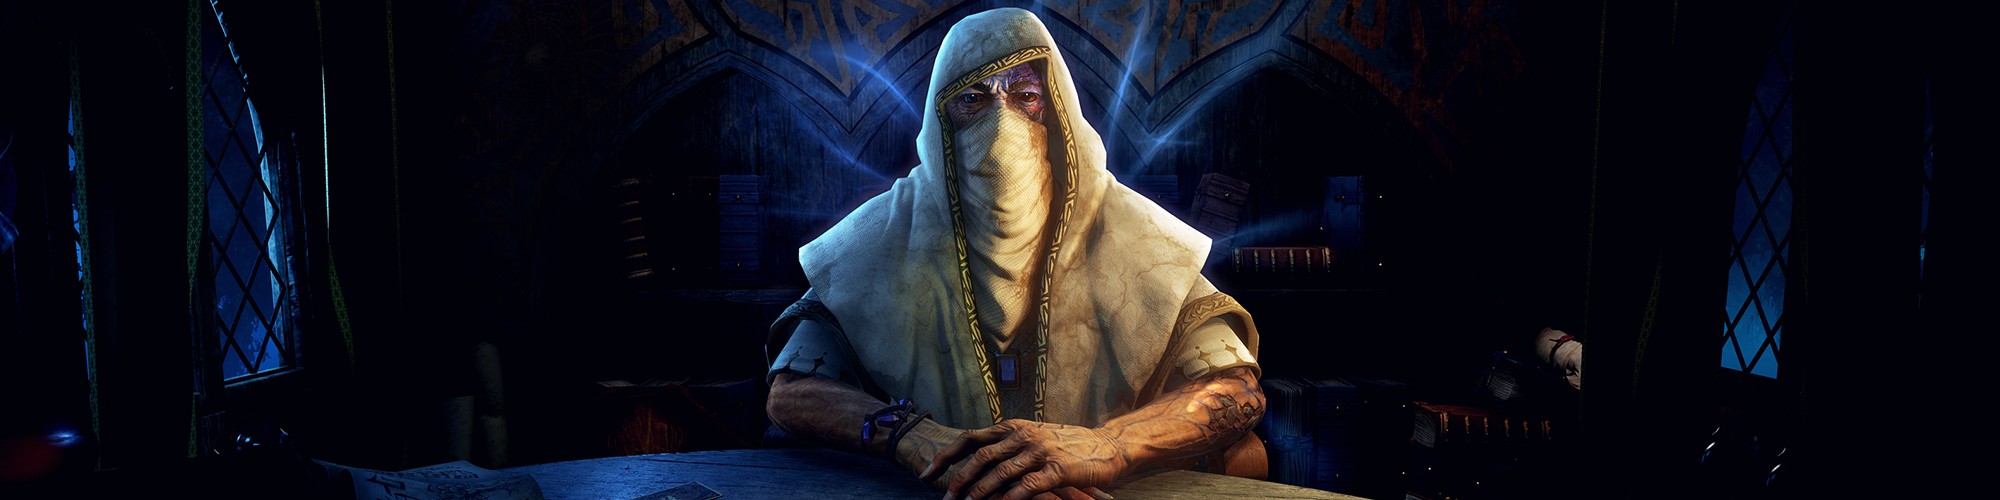 Hand of Fate 2 technical specifications for computer